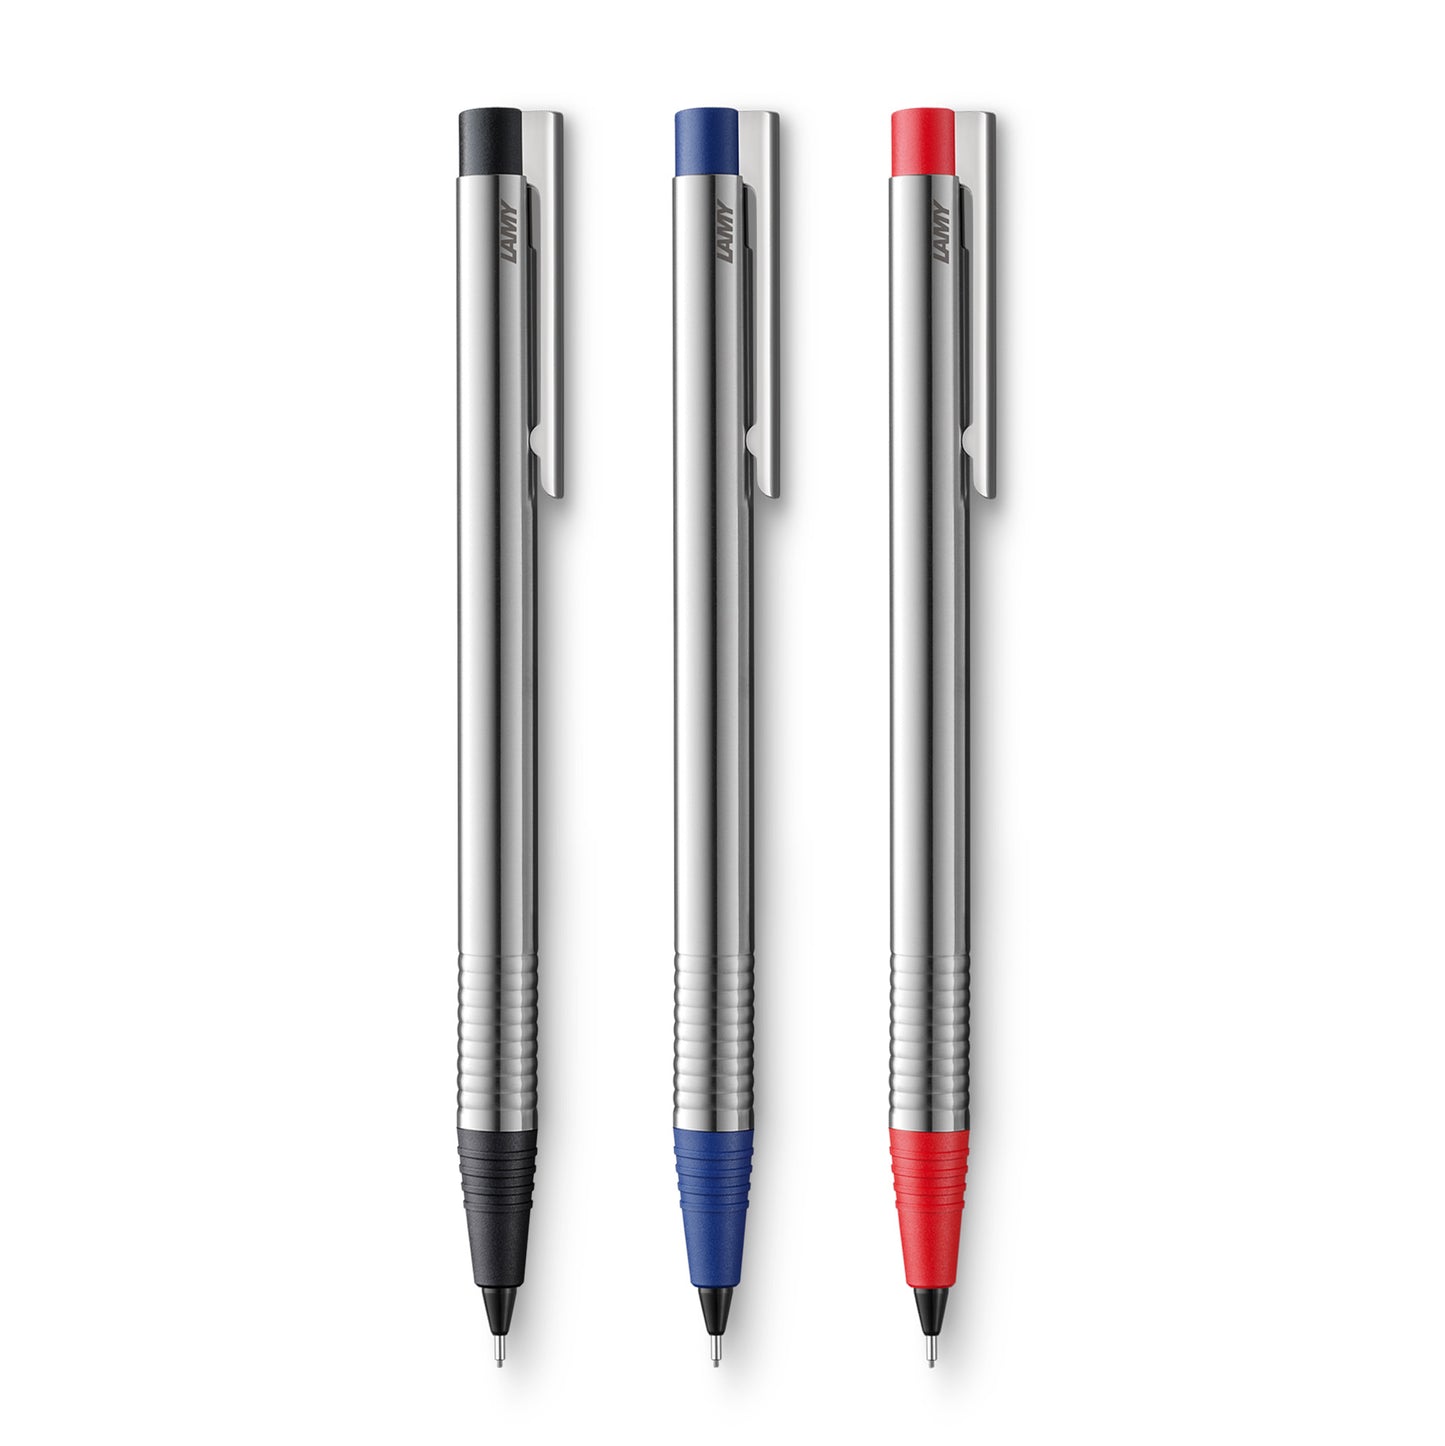 Lamy Logo Pencils in Black Red and Blue with Matte stainless steel finish, Lamy logo mechanical pencils, mechanical pencils made in Germany